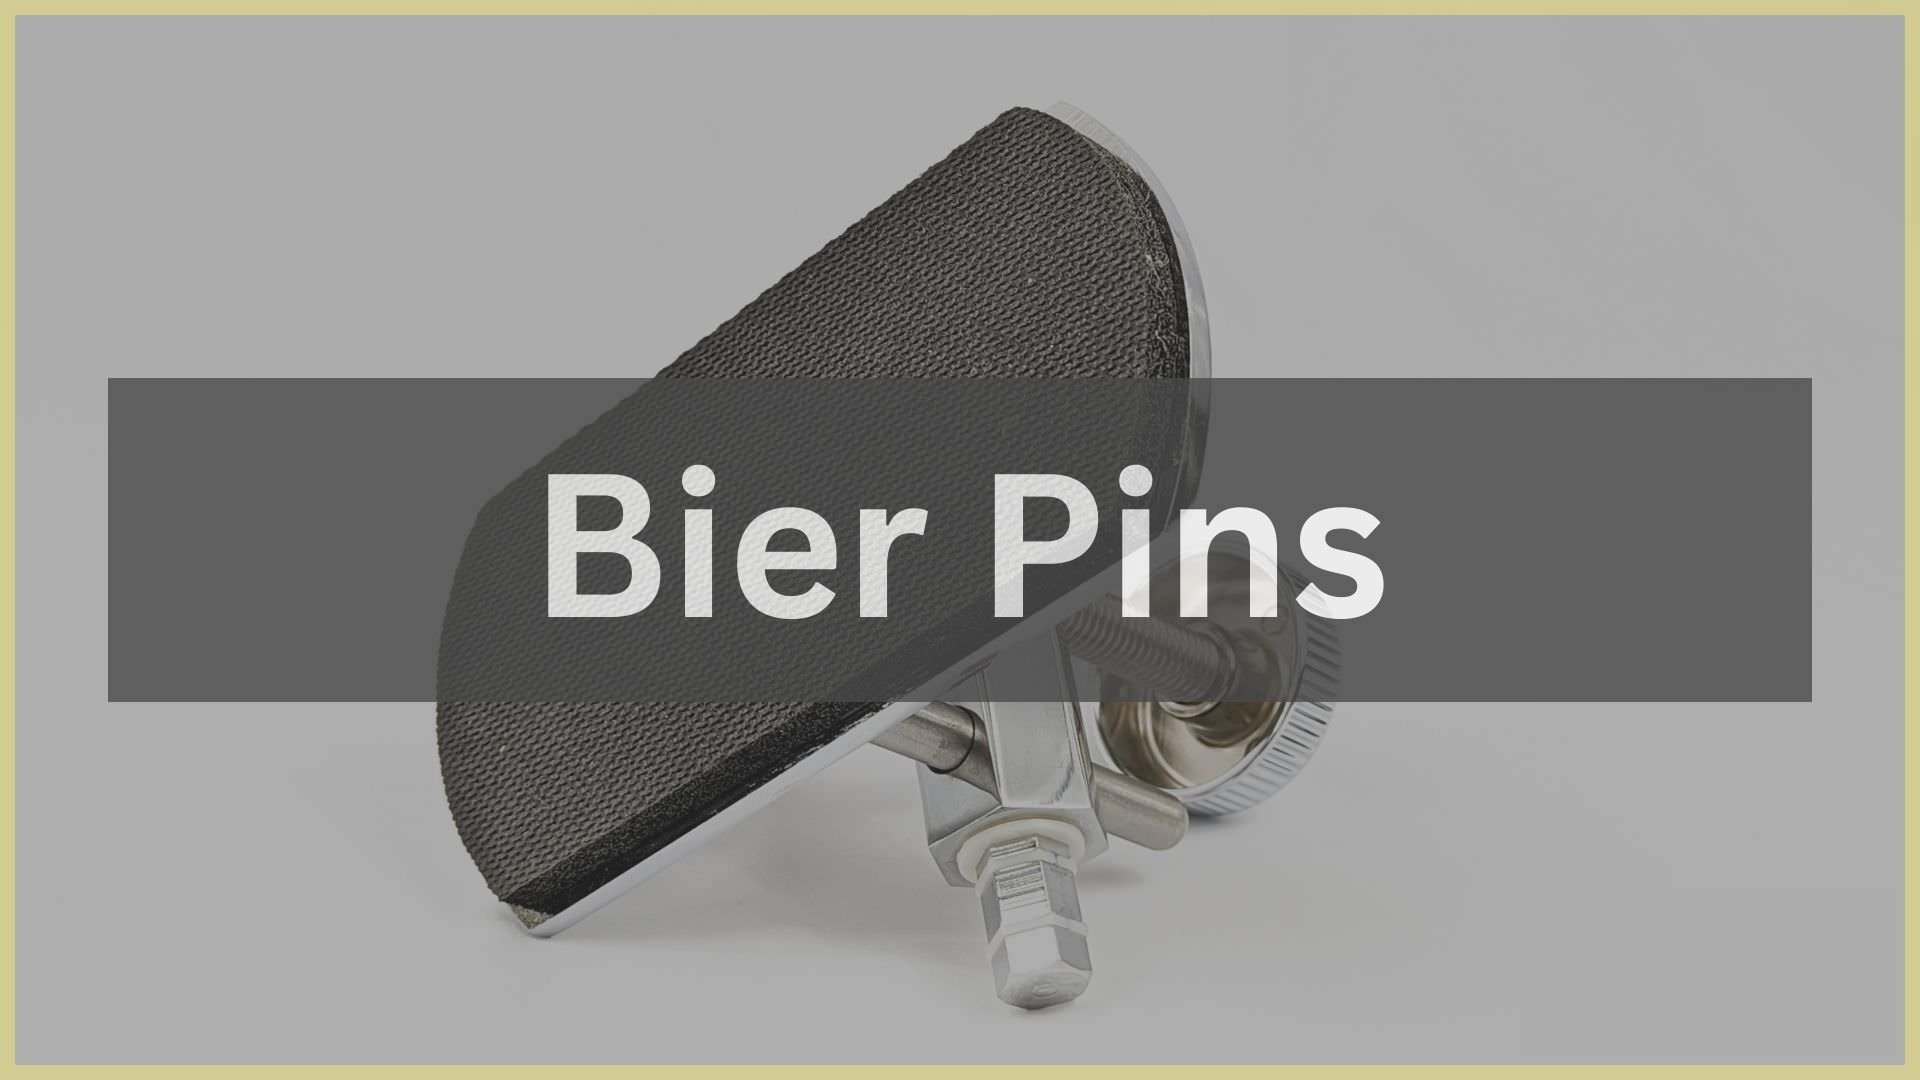 bier-pins-for-hearse-funeral-vehicles.jpg